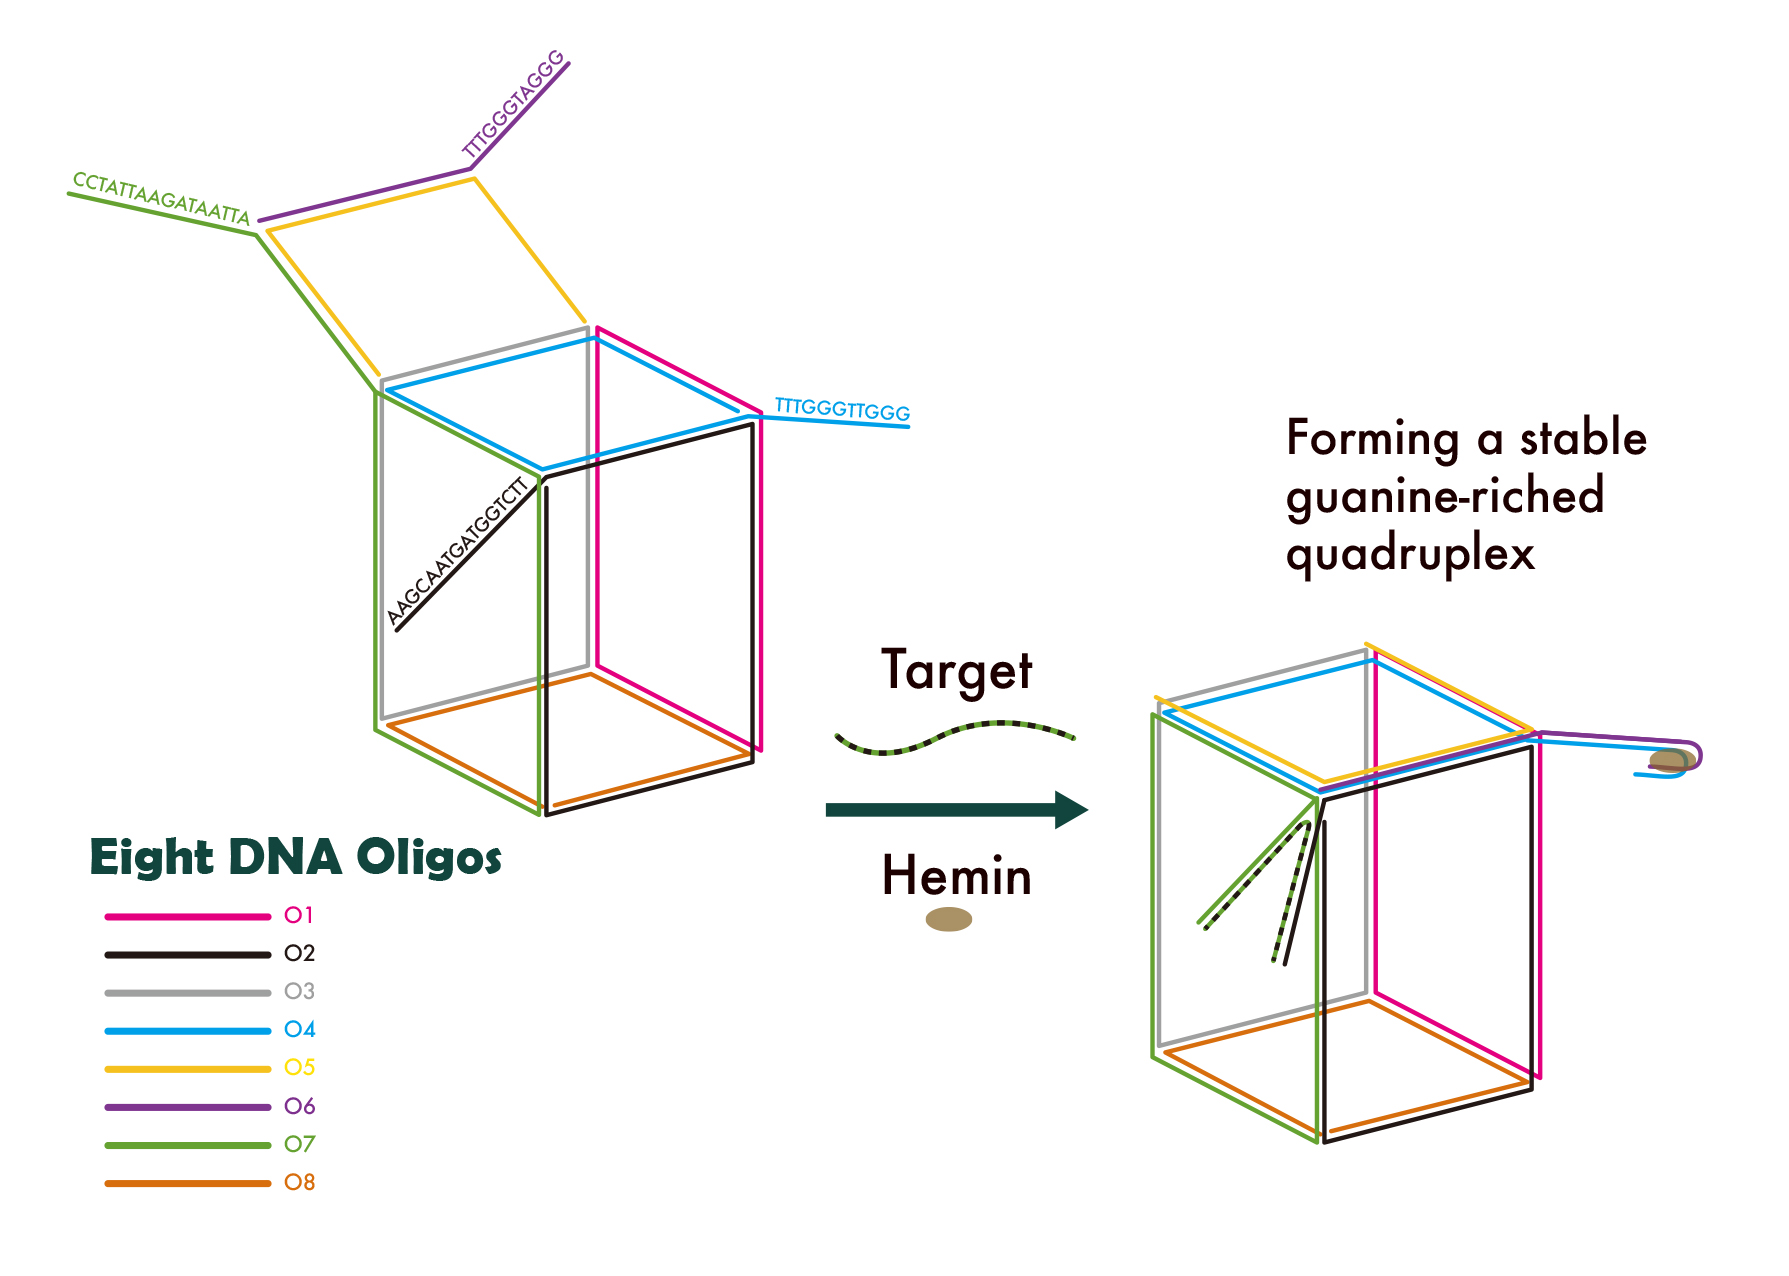 The nano-cube is designed according to Watson & Crick’s principle. Under guanine-riched sequence, it is able to bind with specific target strand to form a G-quadruplex. The G-quadruplex will enhance the peroxidase activity of hemin and lead to the peroxidation of 2,2'-azino-bis(3-ethylbenzothiazoline-6-sulphonic acid) (ABTS) giving a colorimetric signal. The degree of peroxidase activity indicates the concentration of the target.